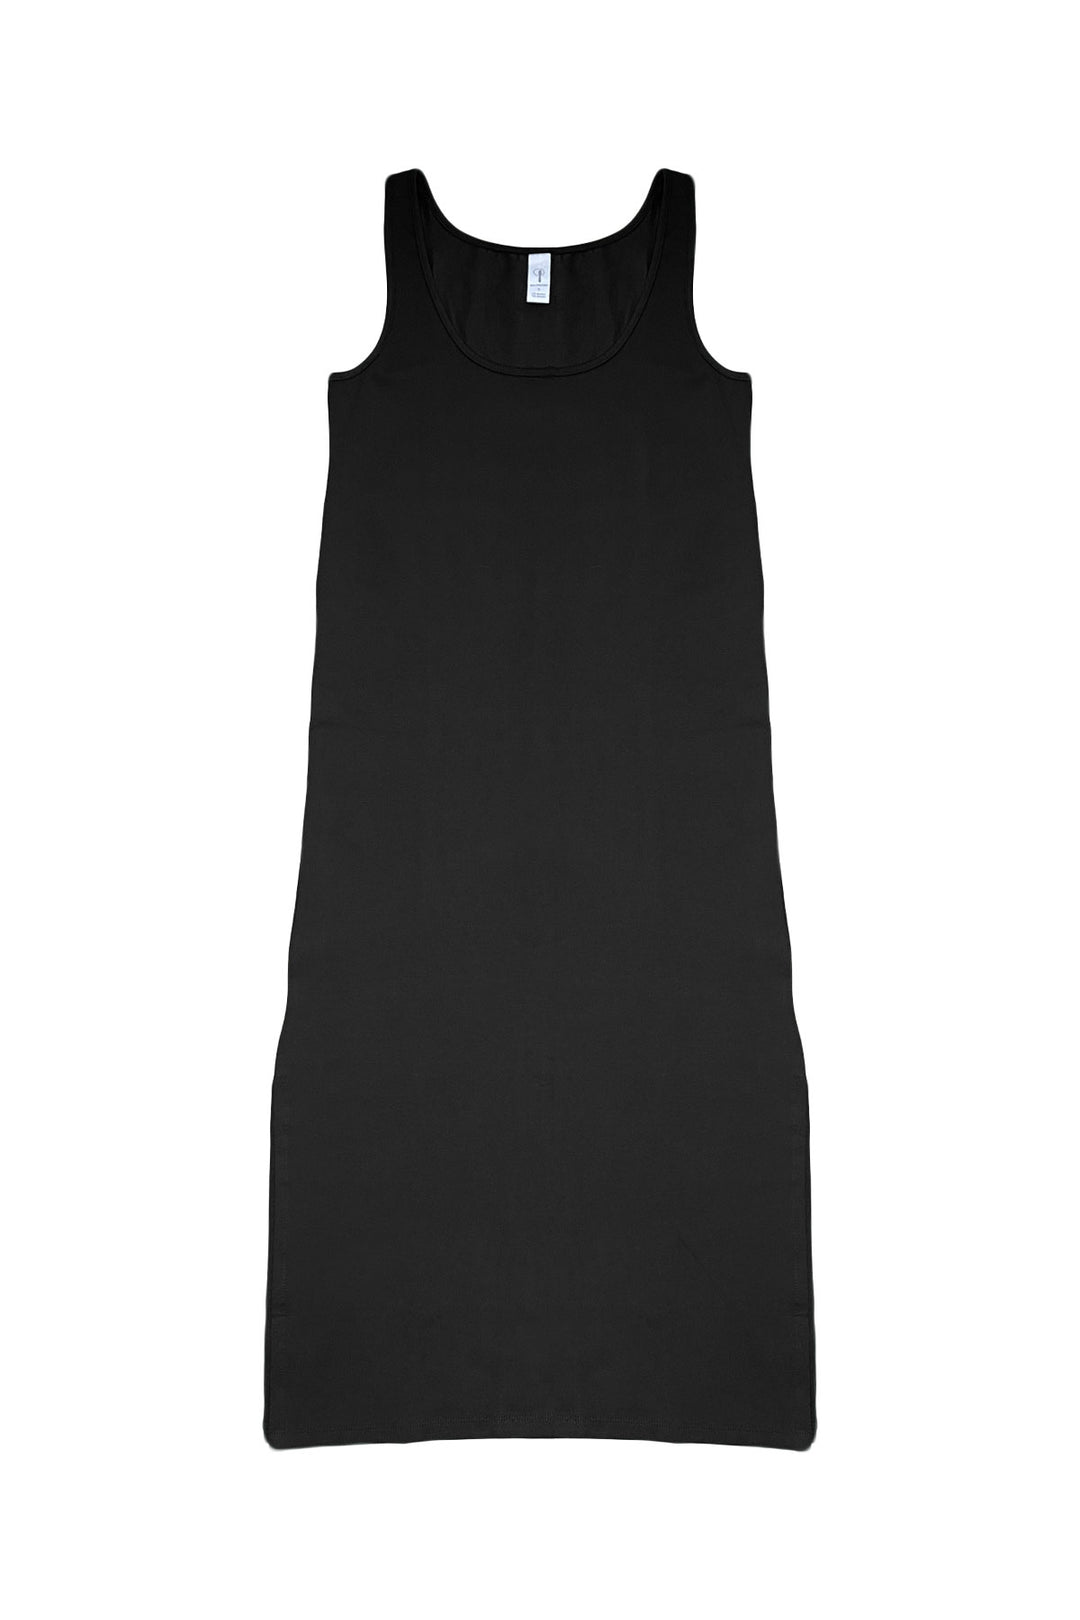 Lucy tank dress in black - Eco Intimates